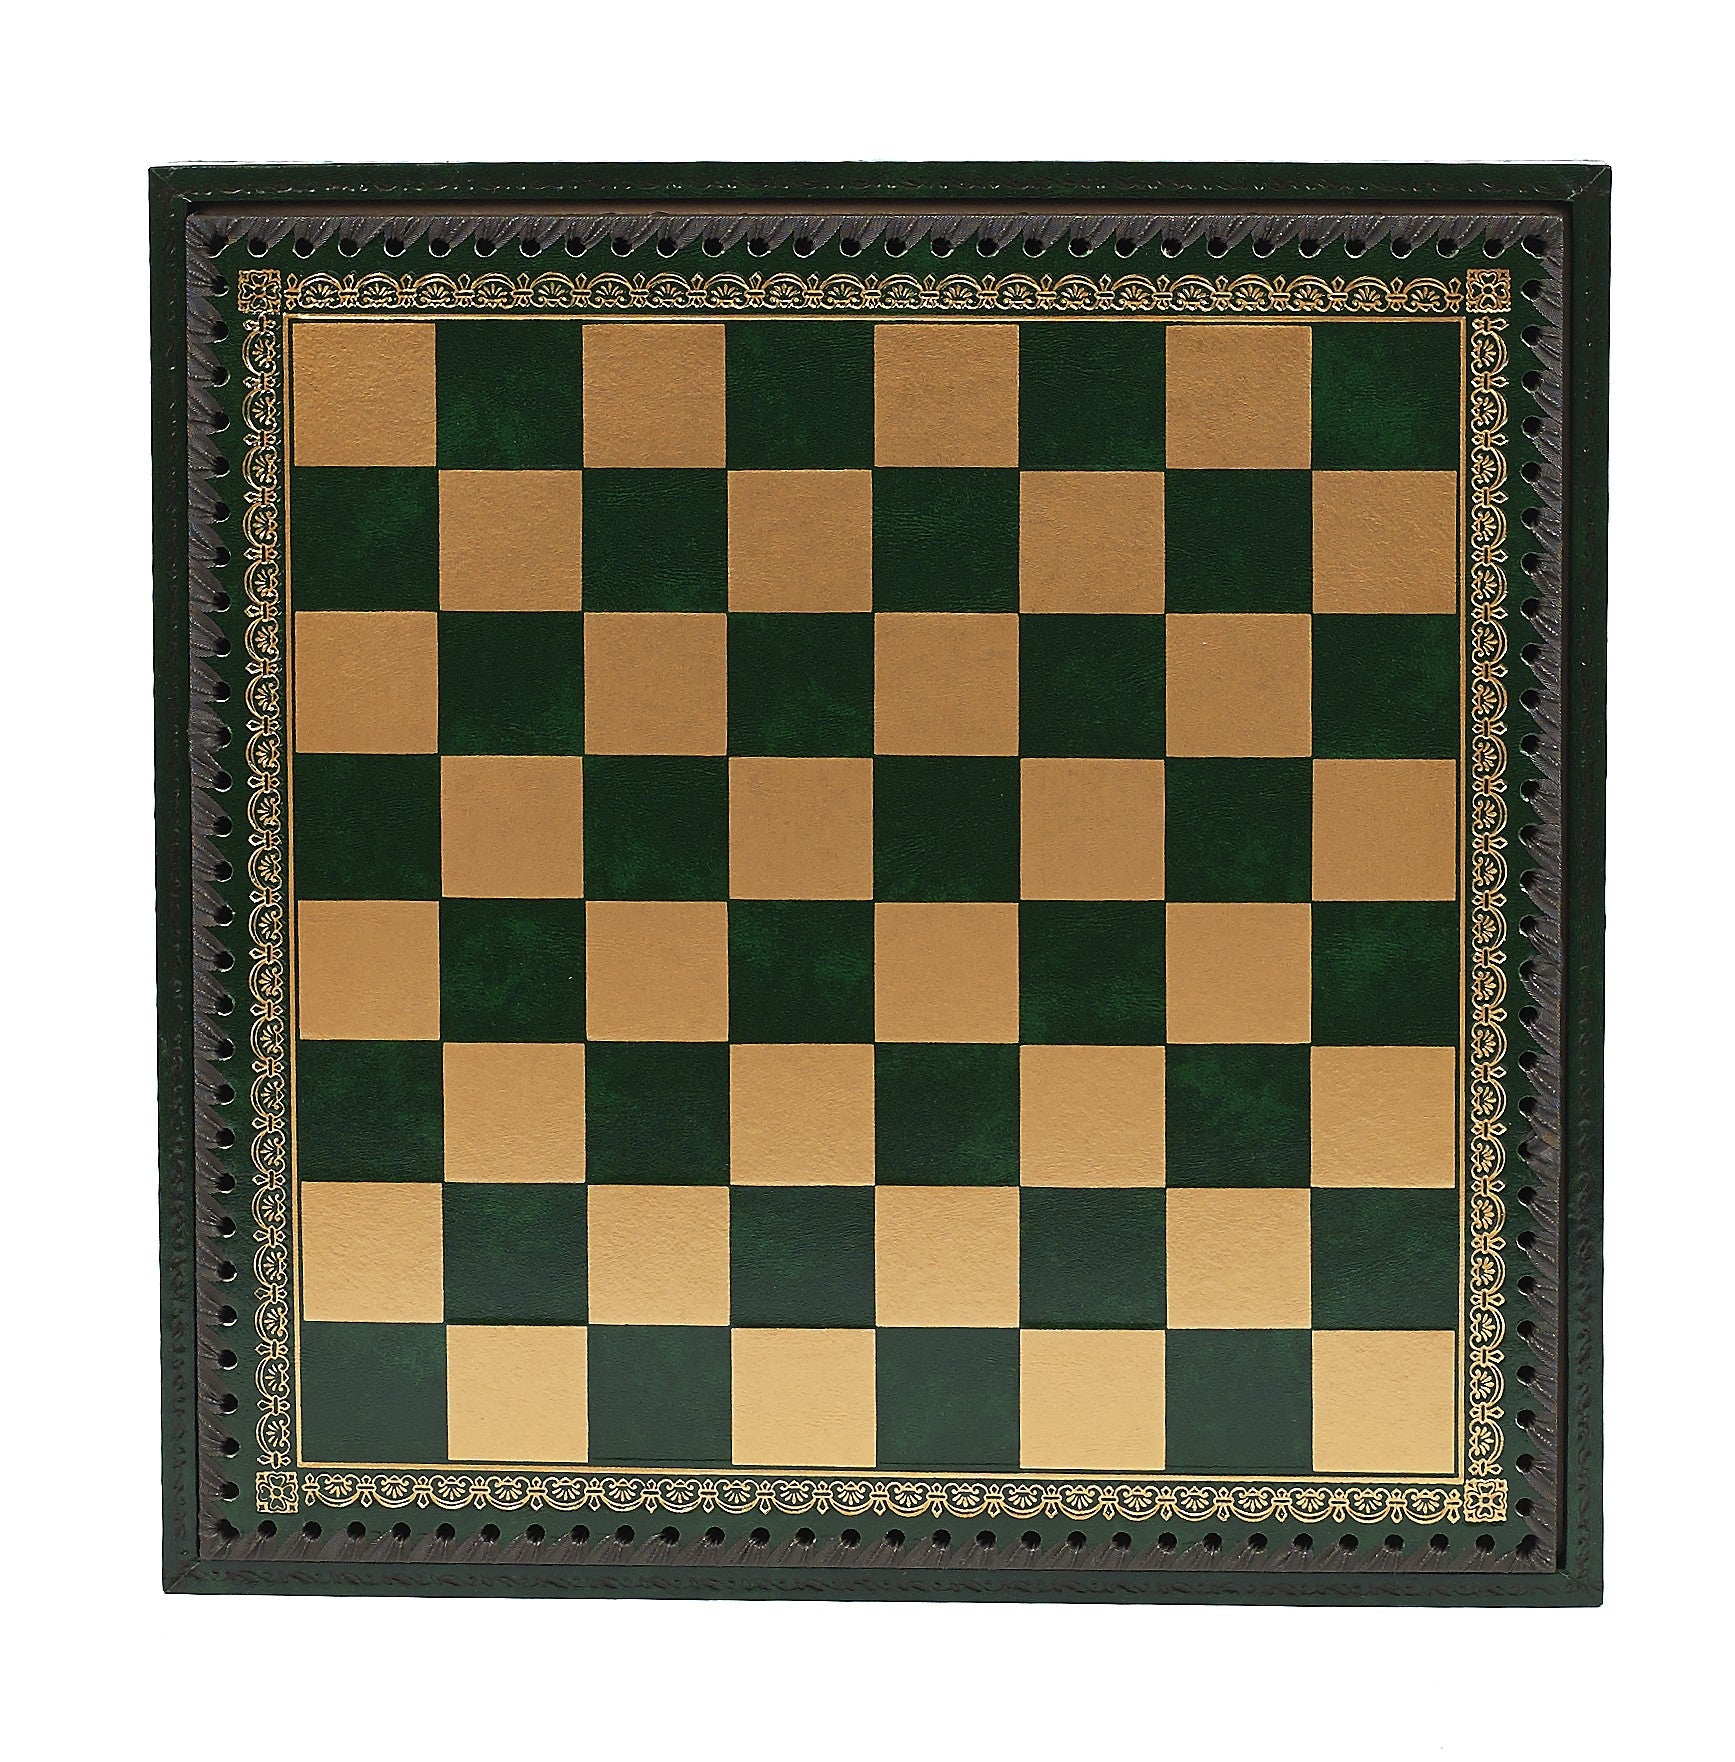 13 7/8 Inch Green Leatherette Cabinet Board from Italy (1 3/8 Inch Squares)